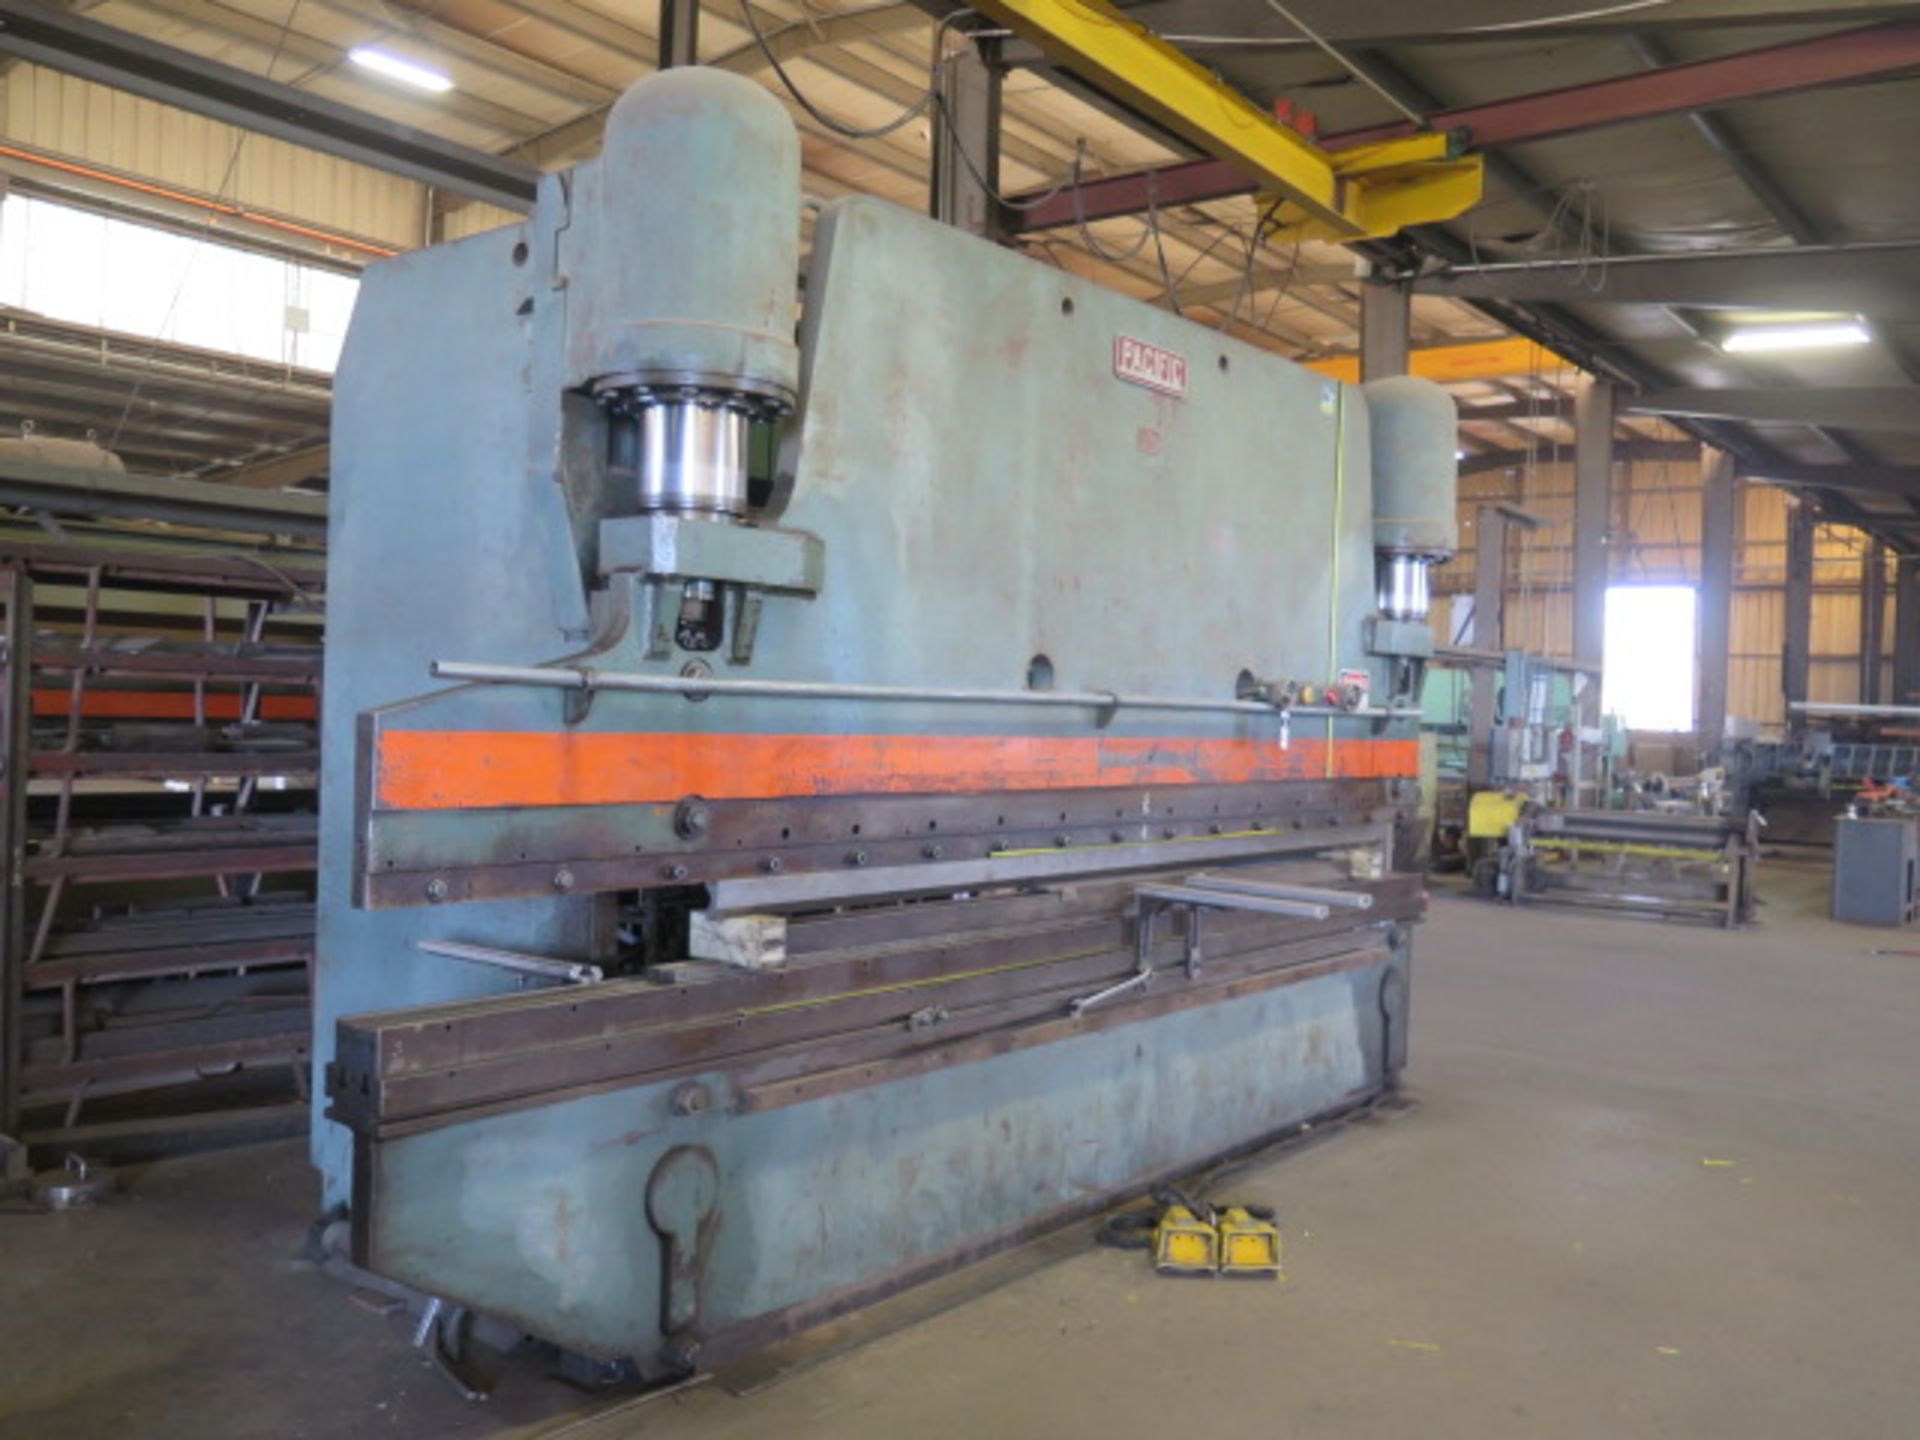 Pacific K300-16 5 1/6” x 14’ Hydraulic Press Brake s/n 6909 w/ 16’ Bed Length, SOLD AS IS - Image 3 of 16